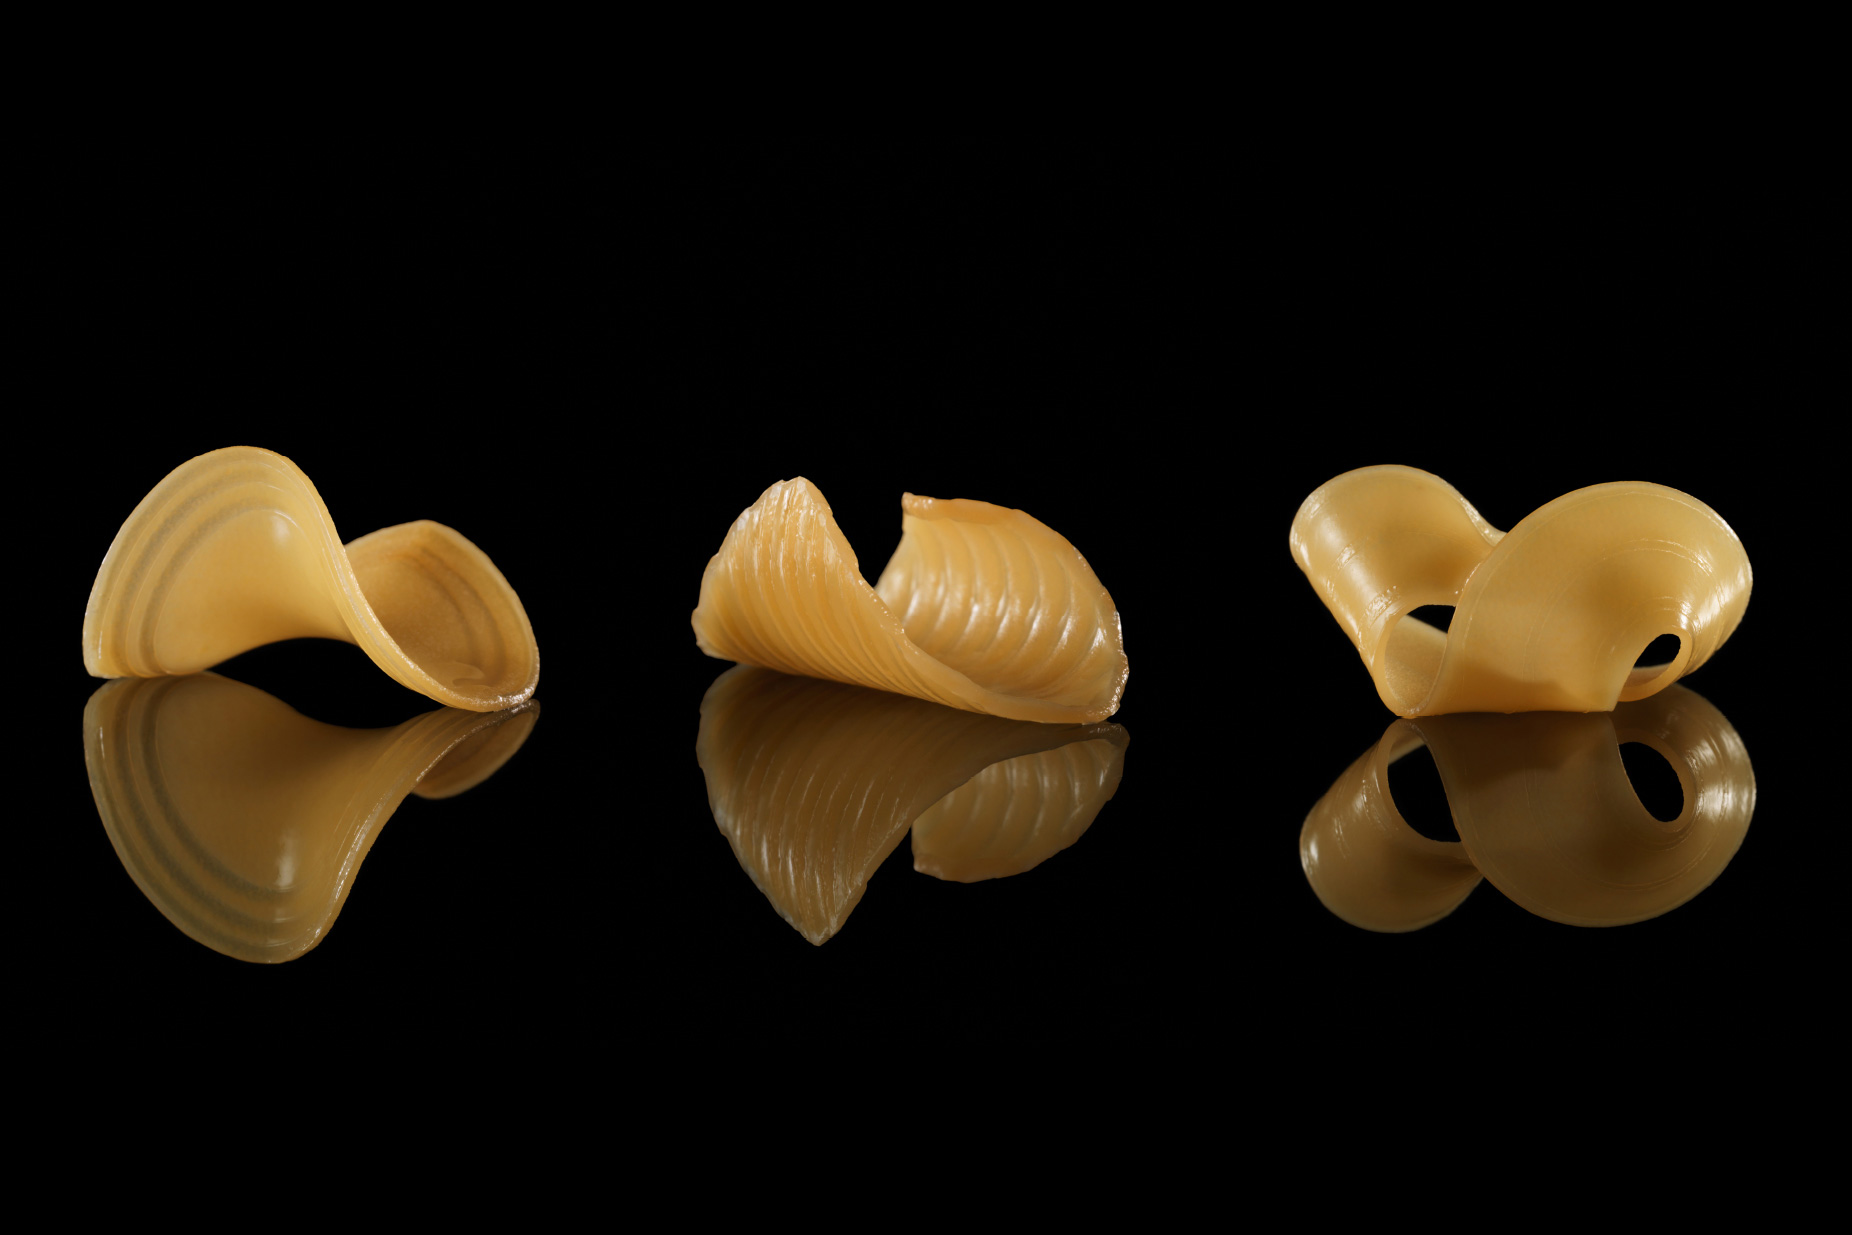 MIT researchers want to make a dumpling that can fold itself